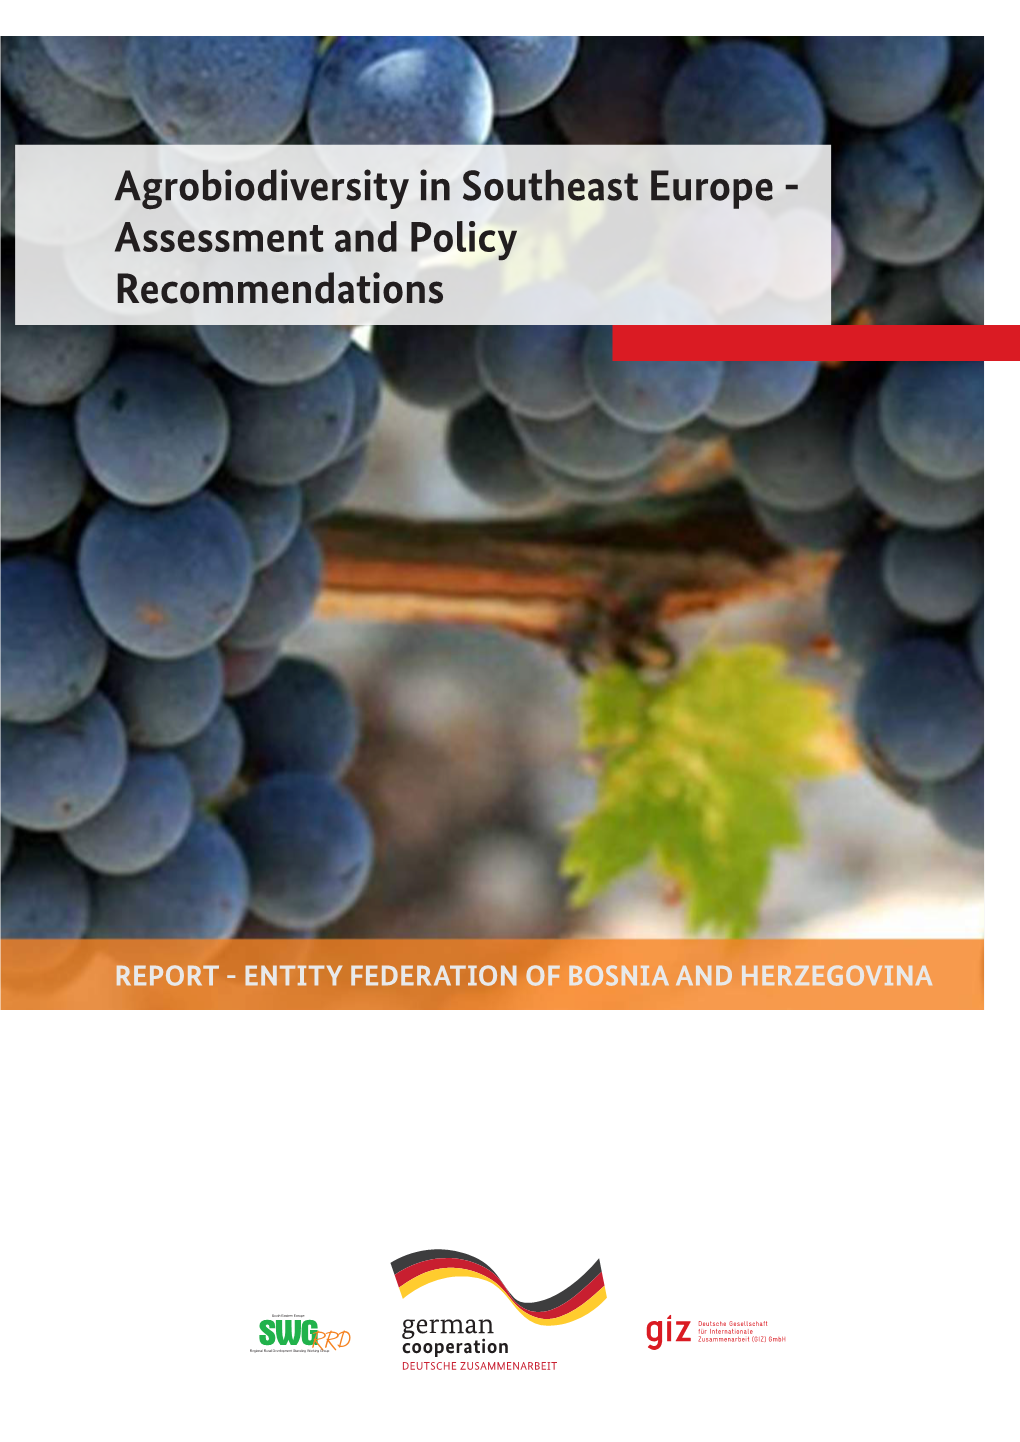 Agrobiodiversity in Southeast Europe - Assessment and Policy Recommendations